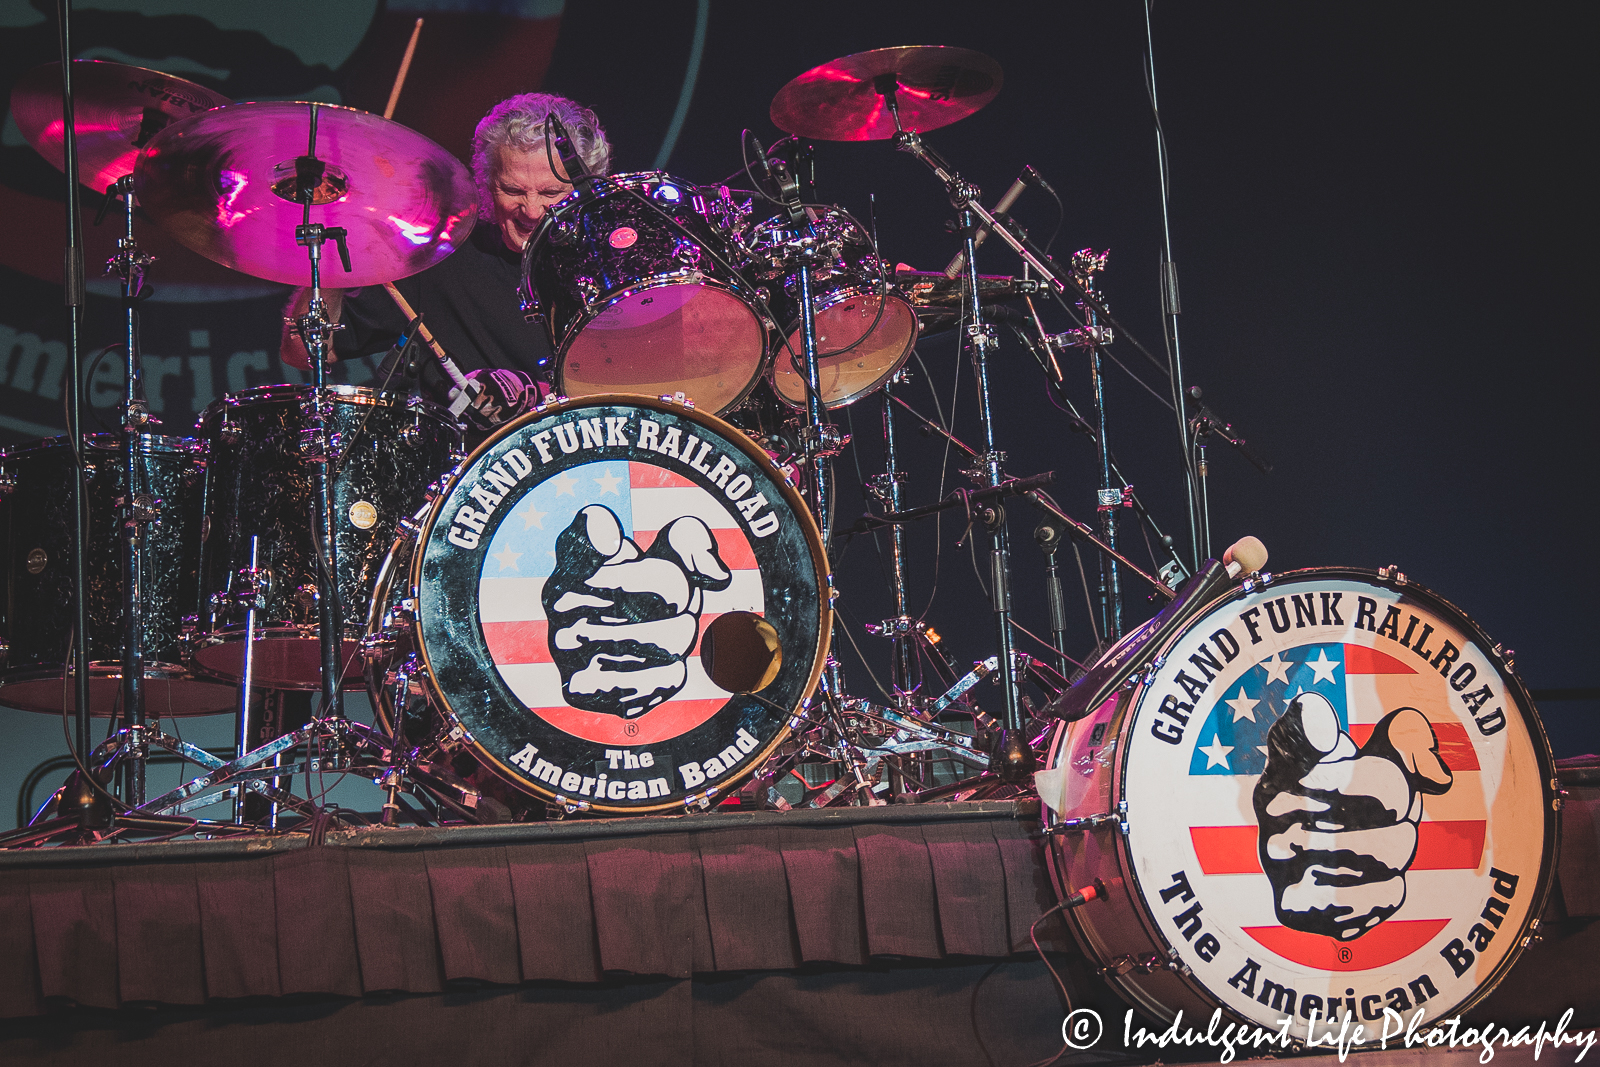 Founding member, lead singer and drummer Don Brewer of Grand Funk Railroad live in concert at Star Pavilion inside of Ameristar Casino in Kansas City. MO on September 18, 2021.